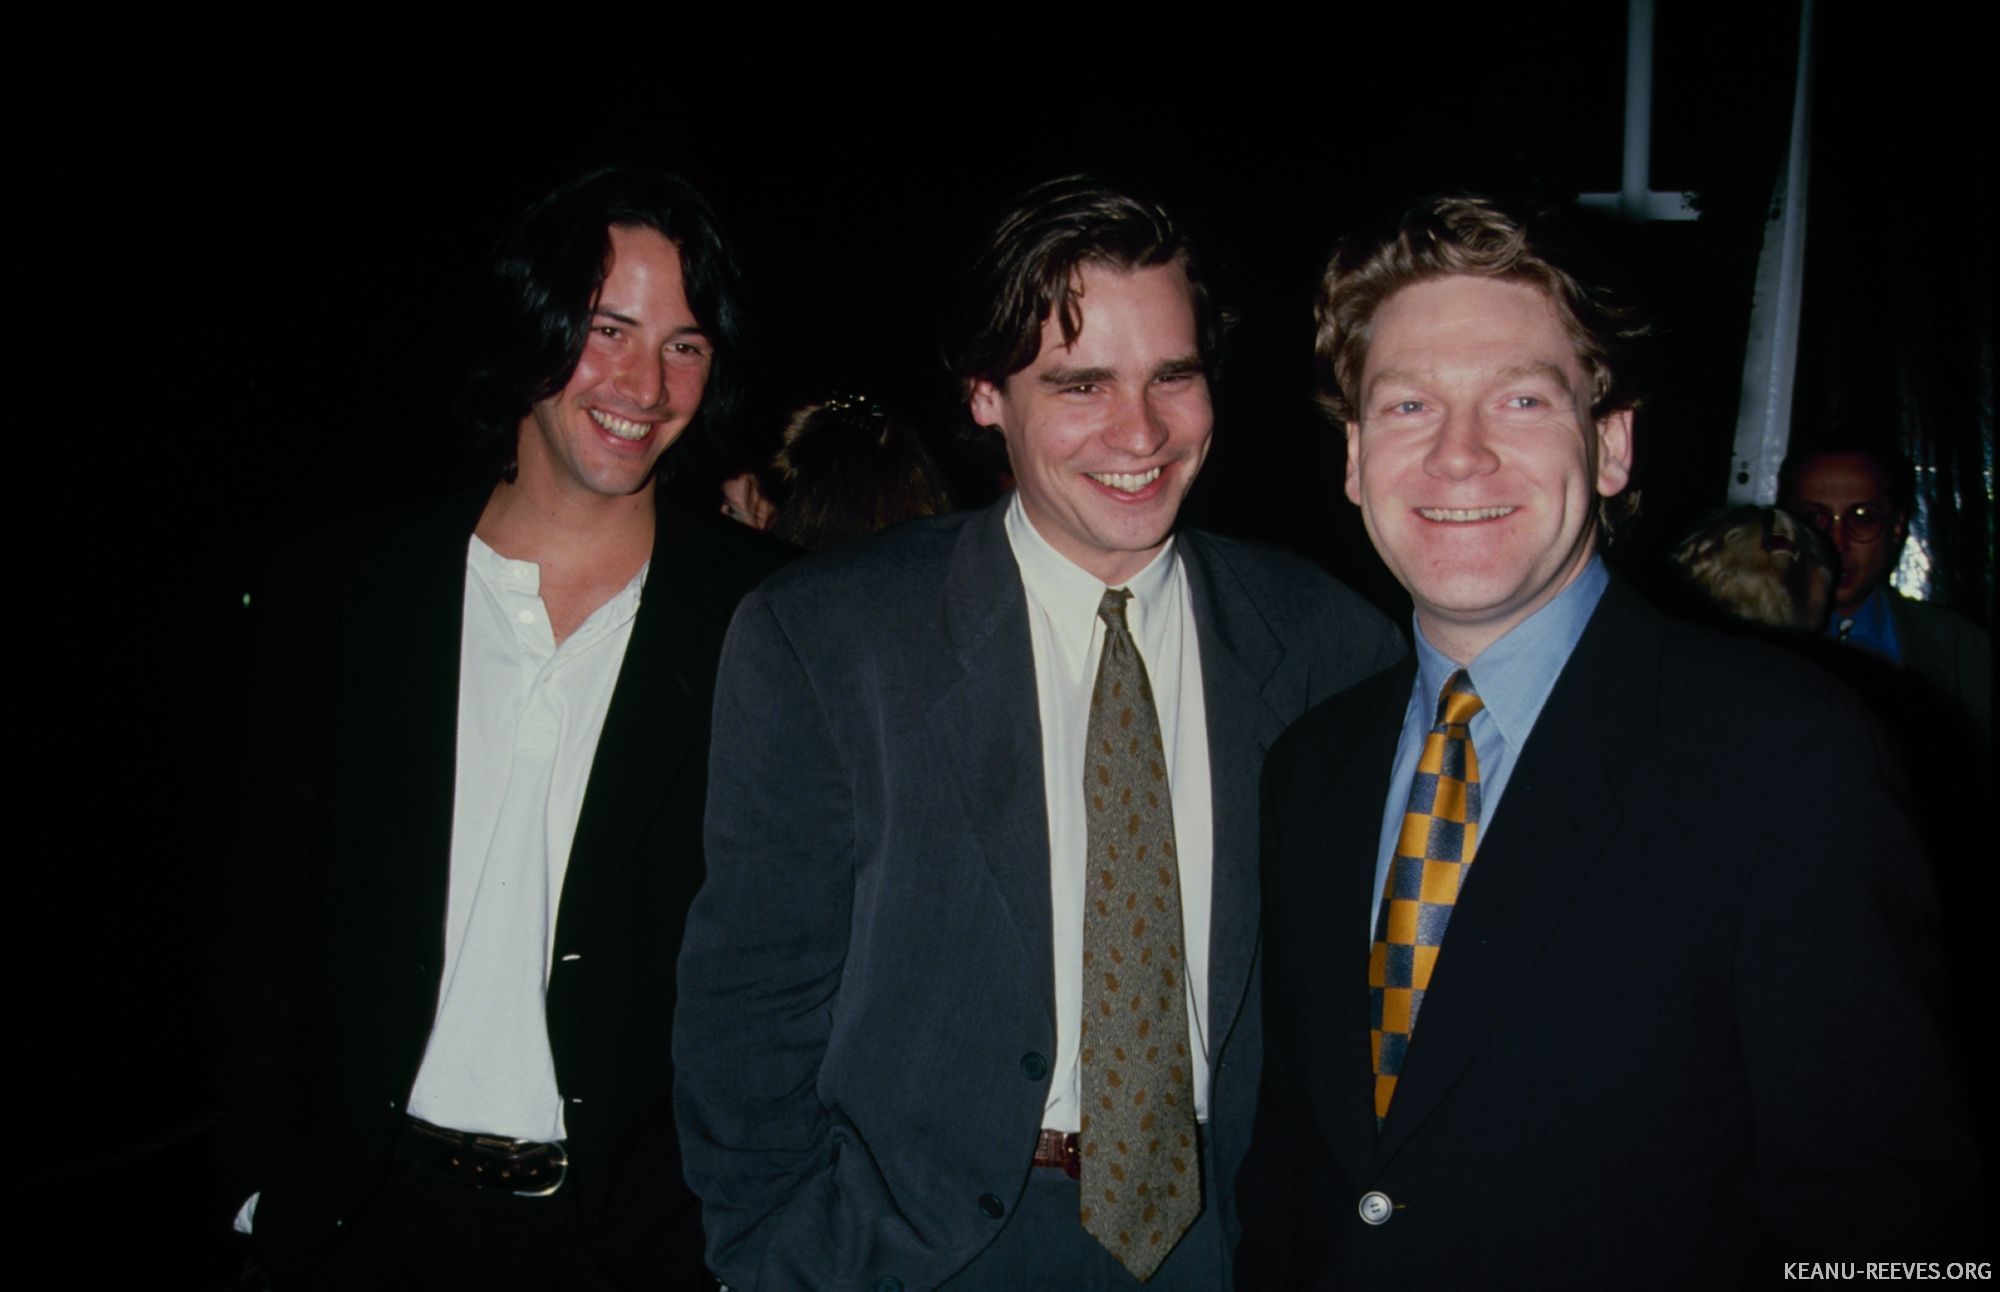 1993-05-06-Much-Ado-About-Nothing-New-York-Premiere-014.jpg